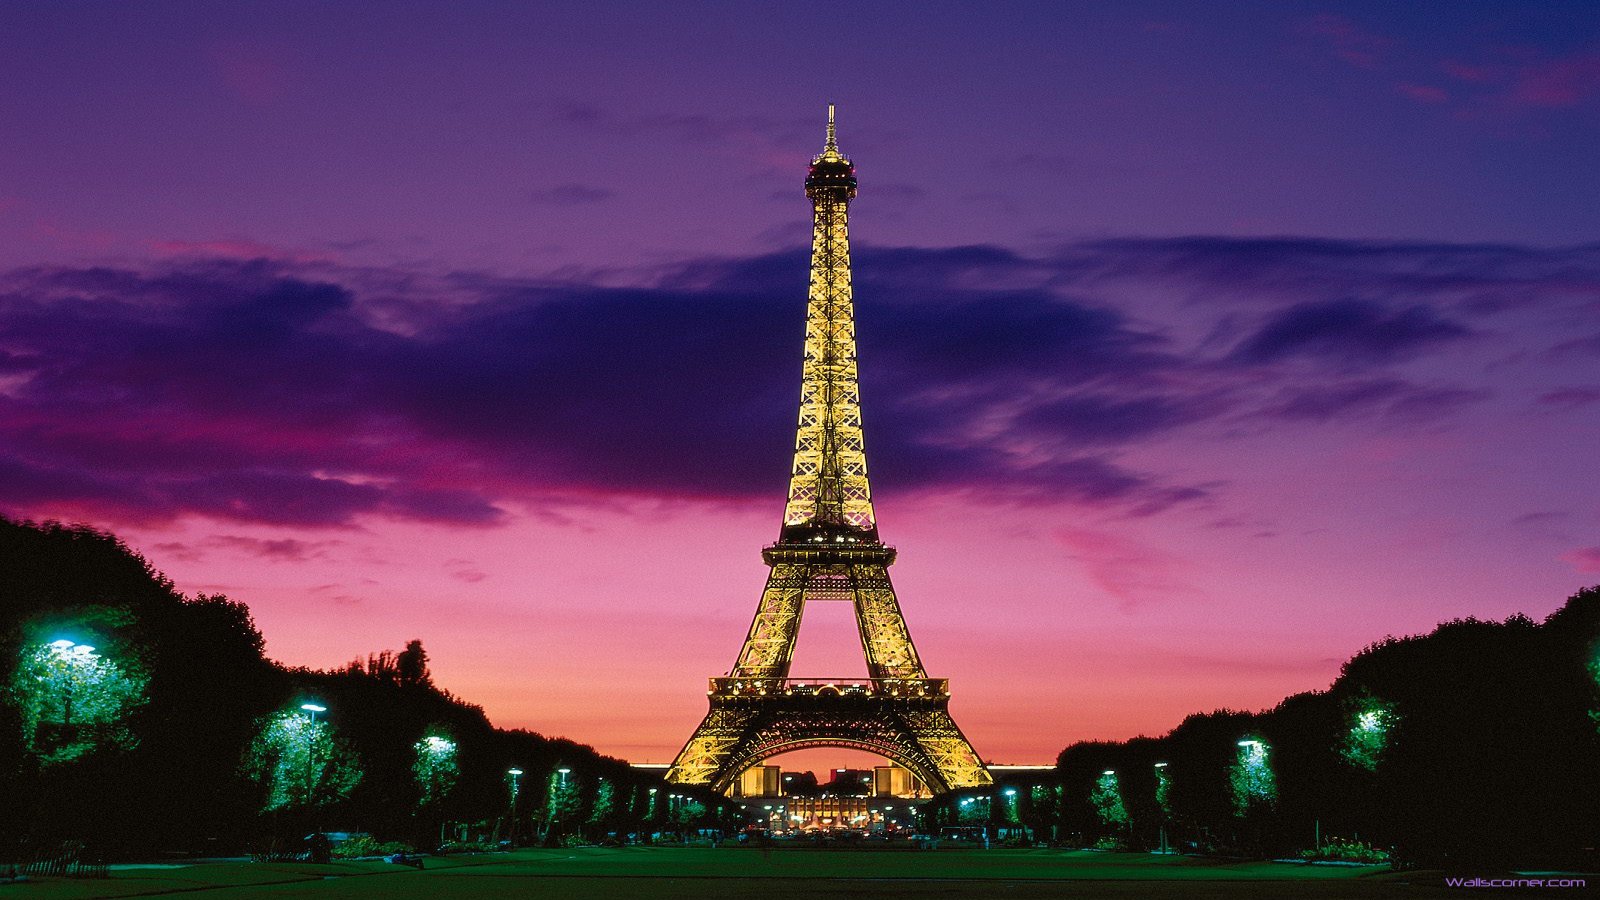  Download Eiffel Tower At Night Paris France Wallpaper Car Pictures